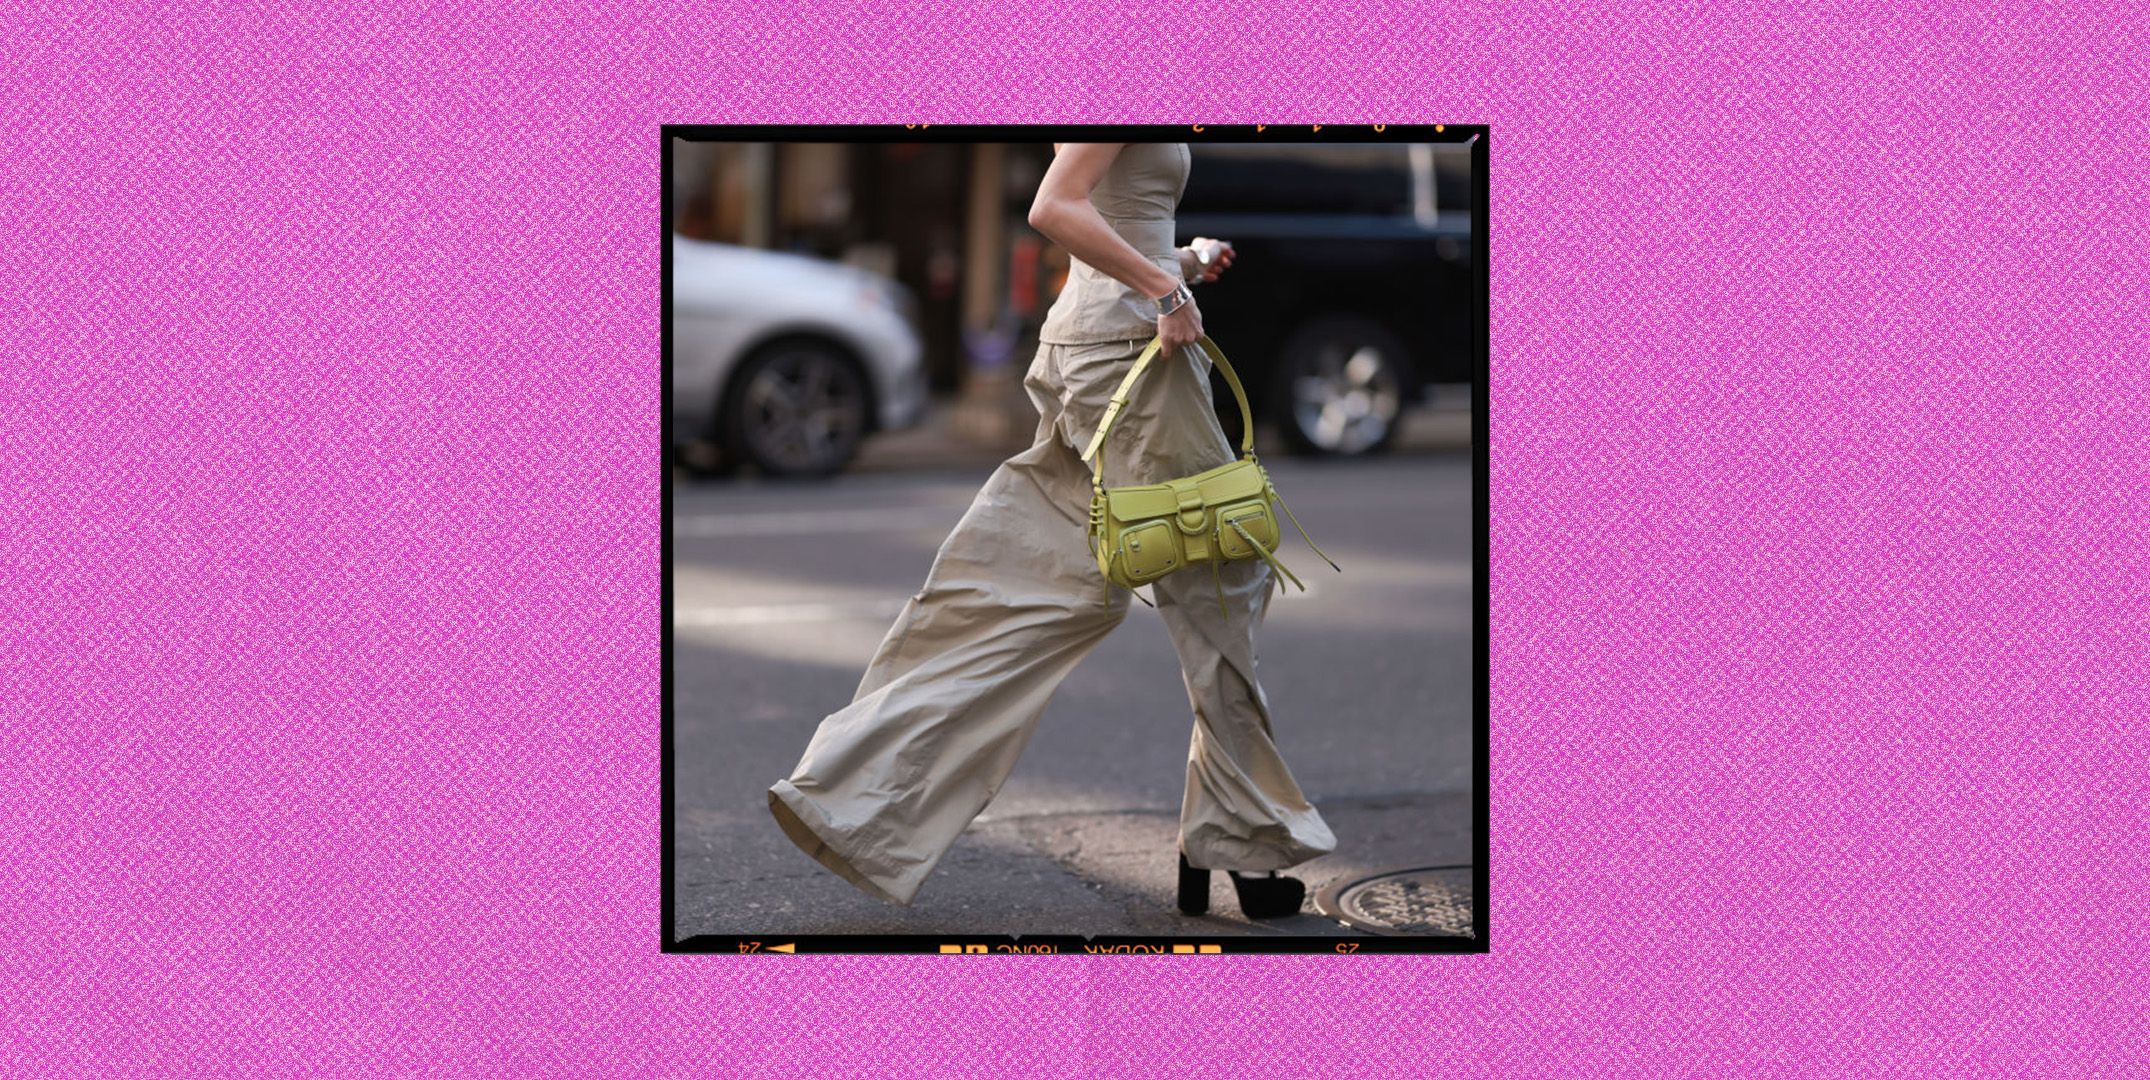 10 Seriously Chic Ways To Wear Cargo Pants